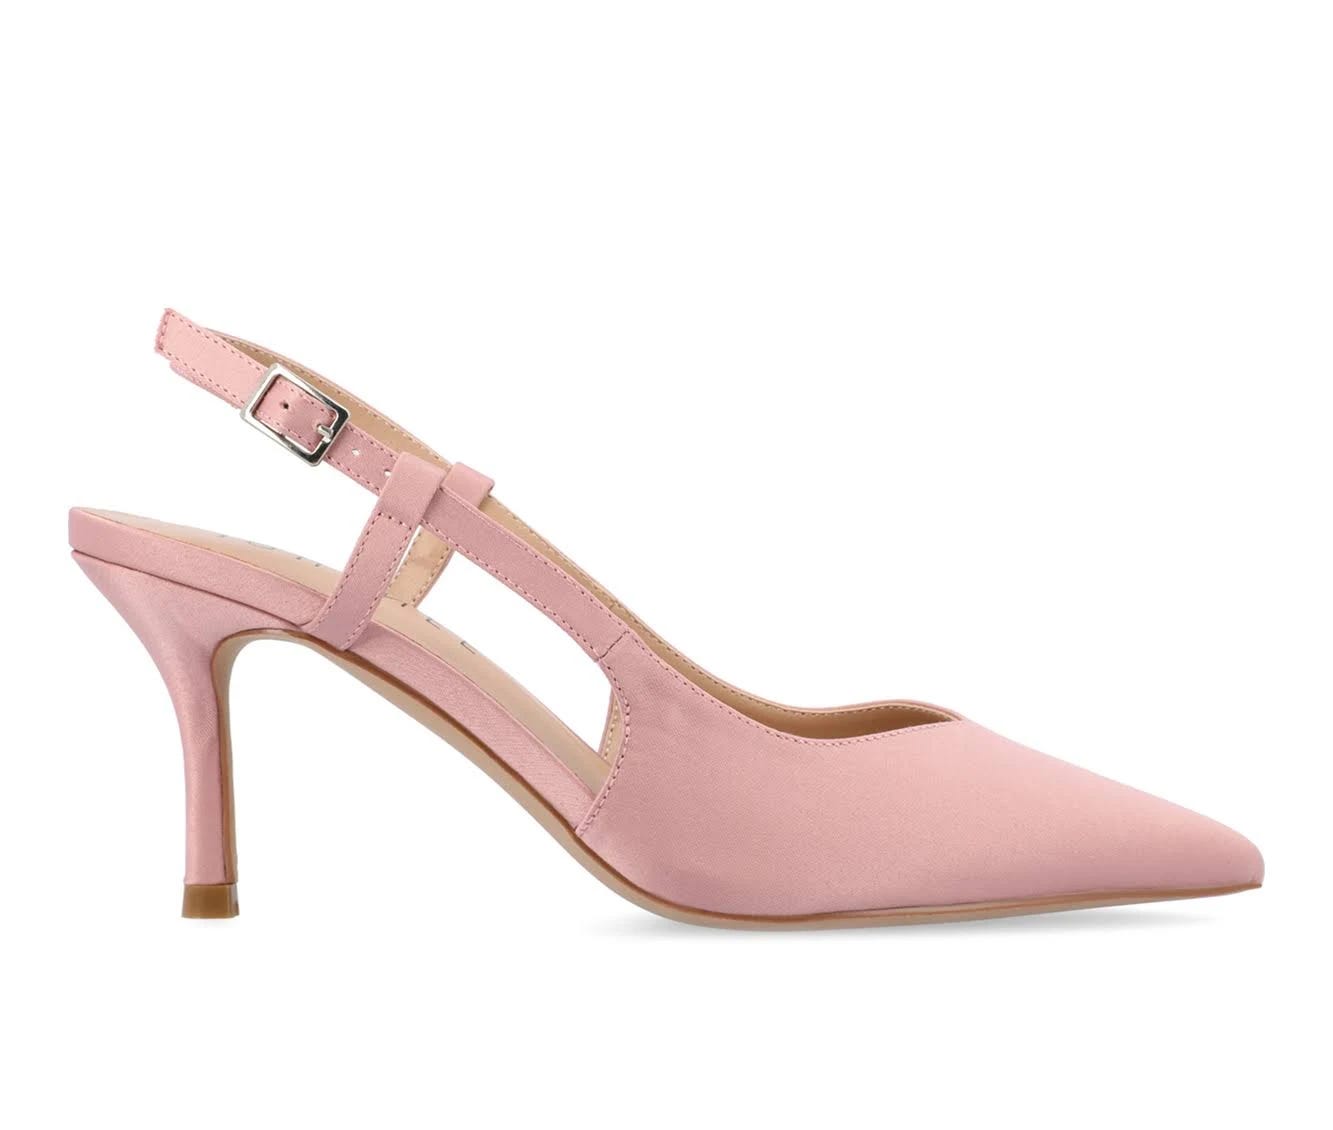 Stylish Light Pink Wide Width Pump with Pointed-Toe and Padded Footbed | Image